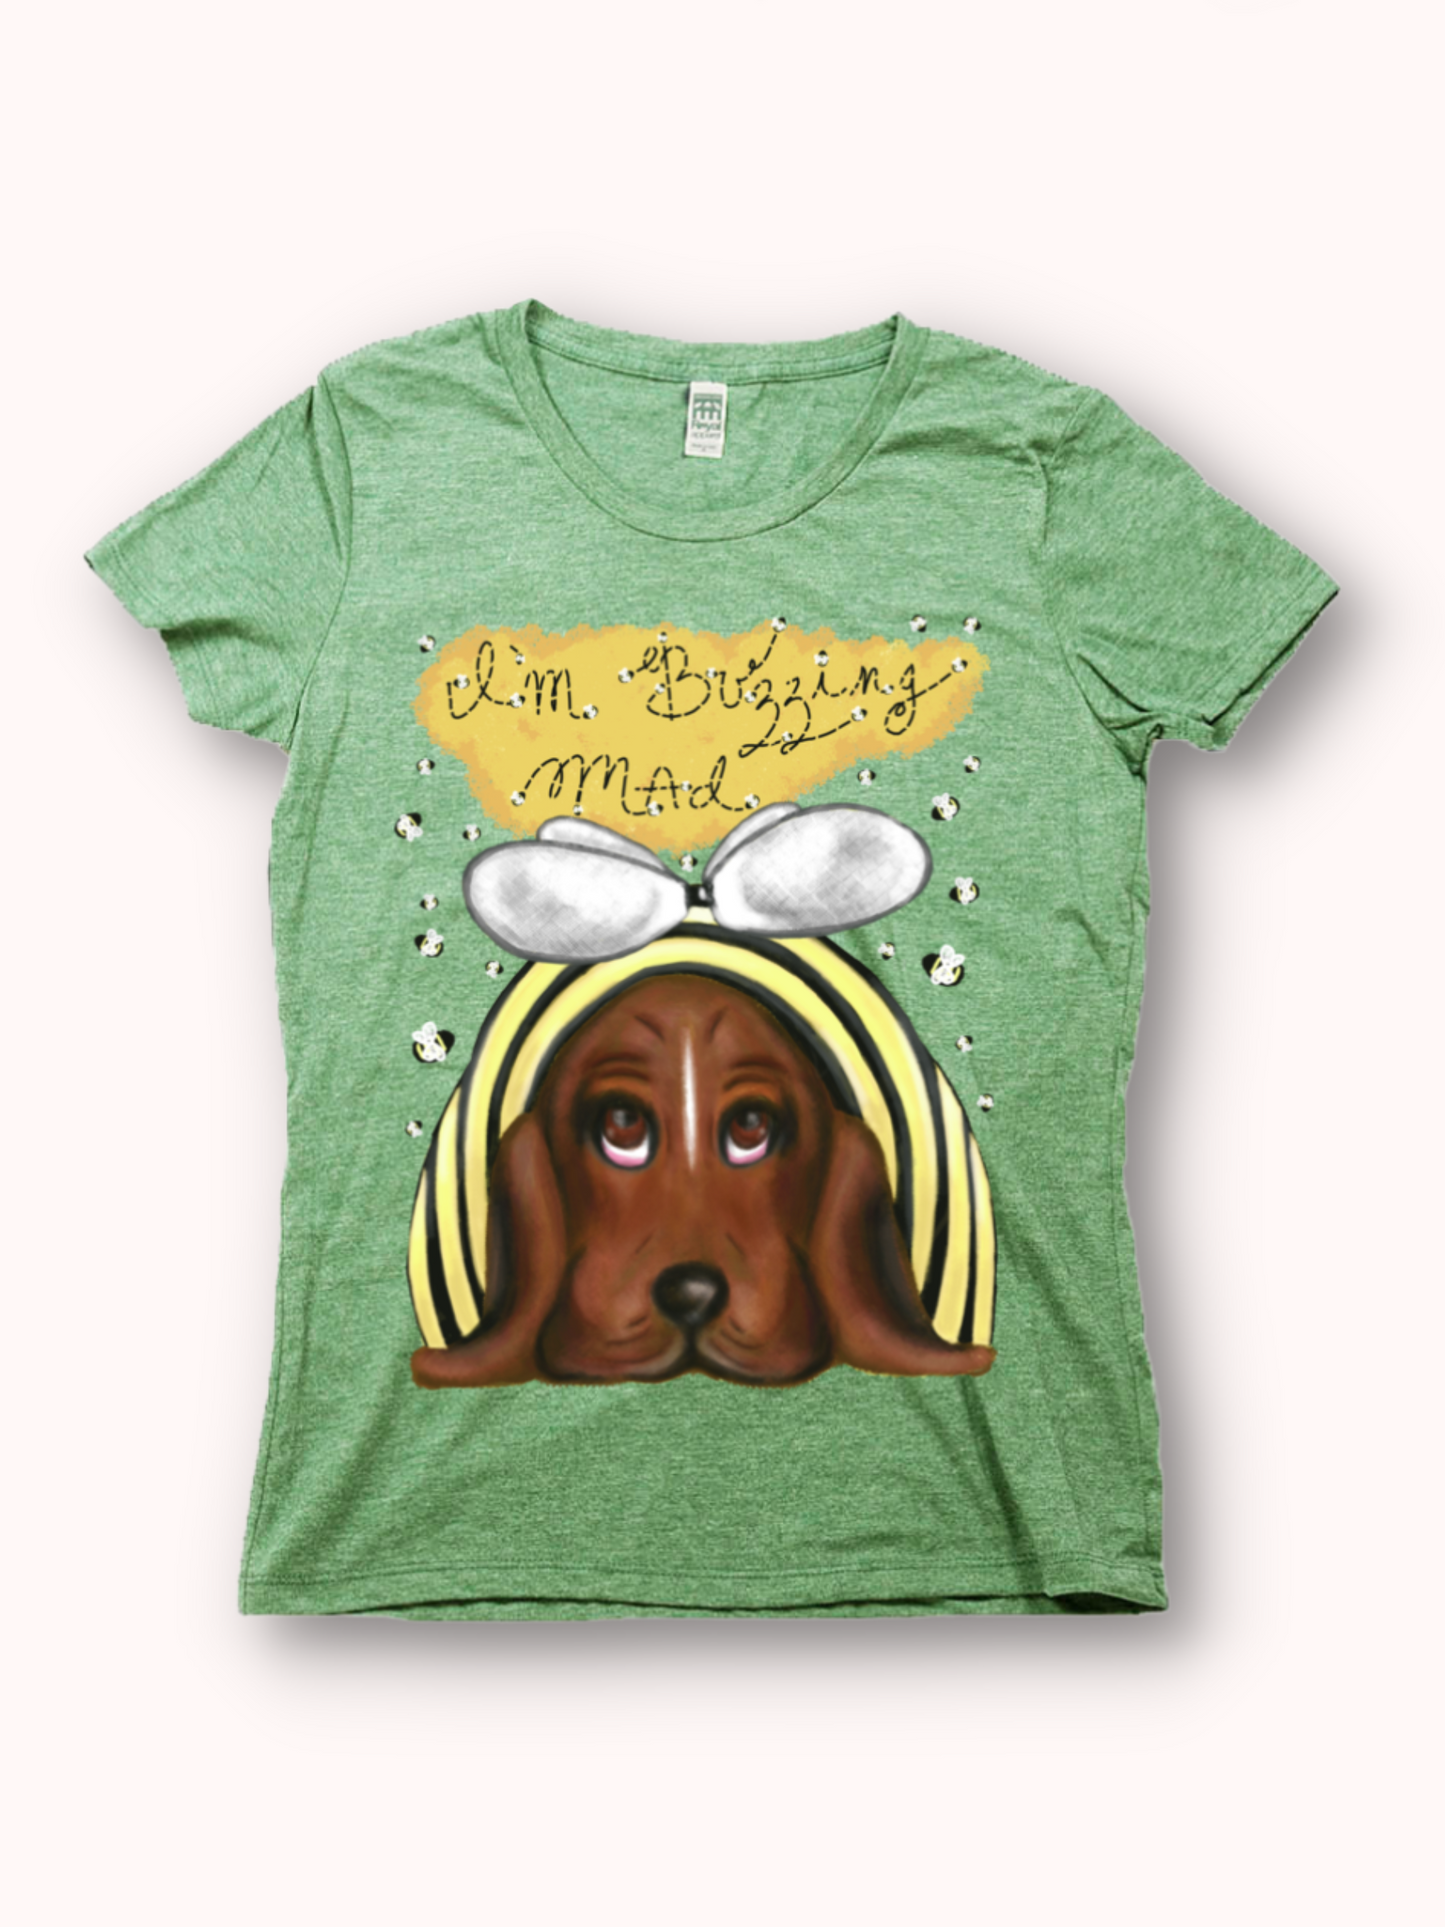 Buzzing Mad - Women's - USA Made Organic Recycled T-shirt